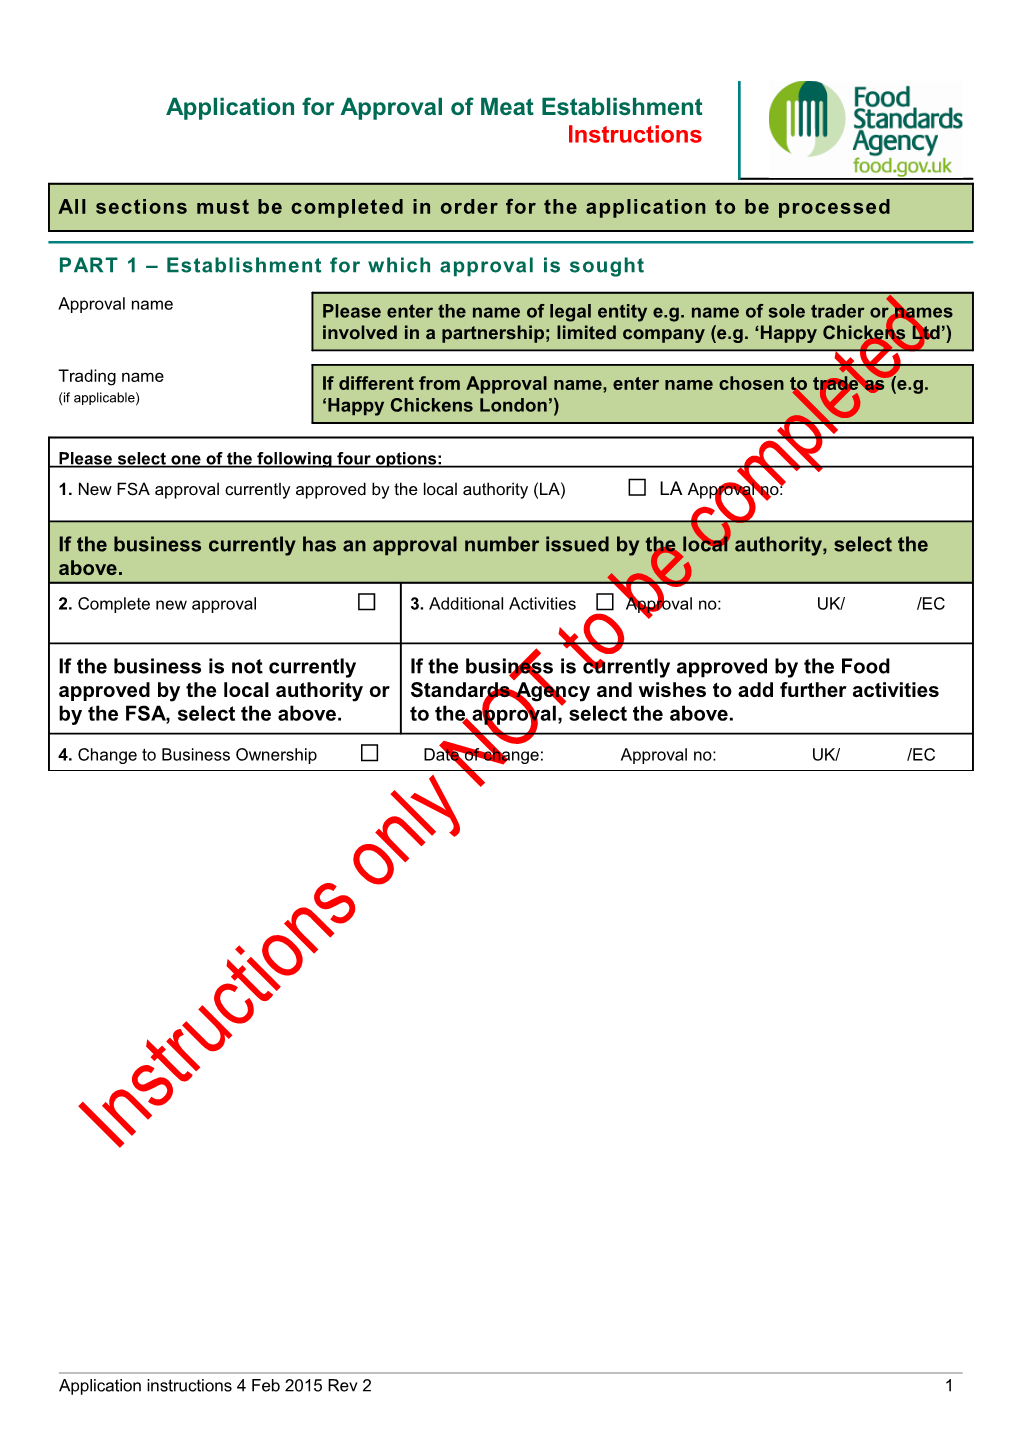 4 App Form Instructions - NOT to BE COMPLETED 04-02-2015